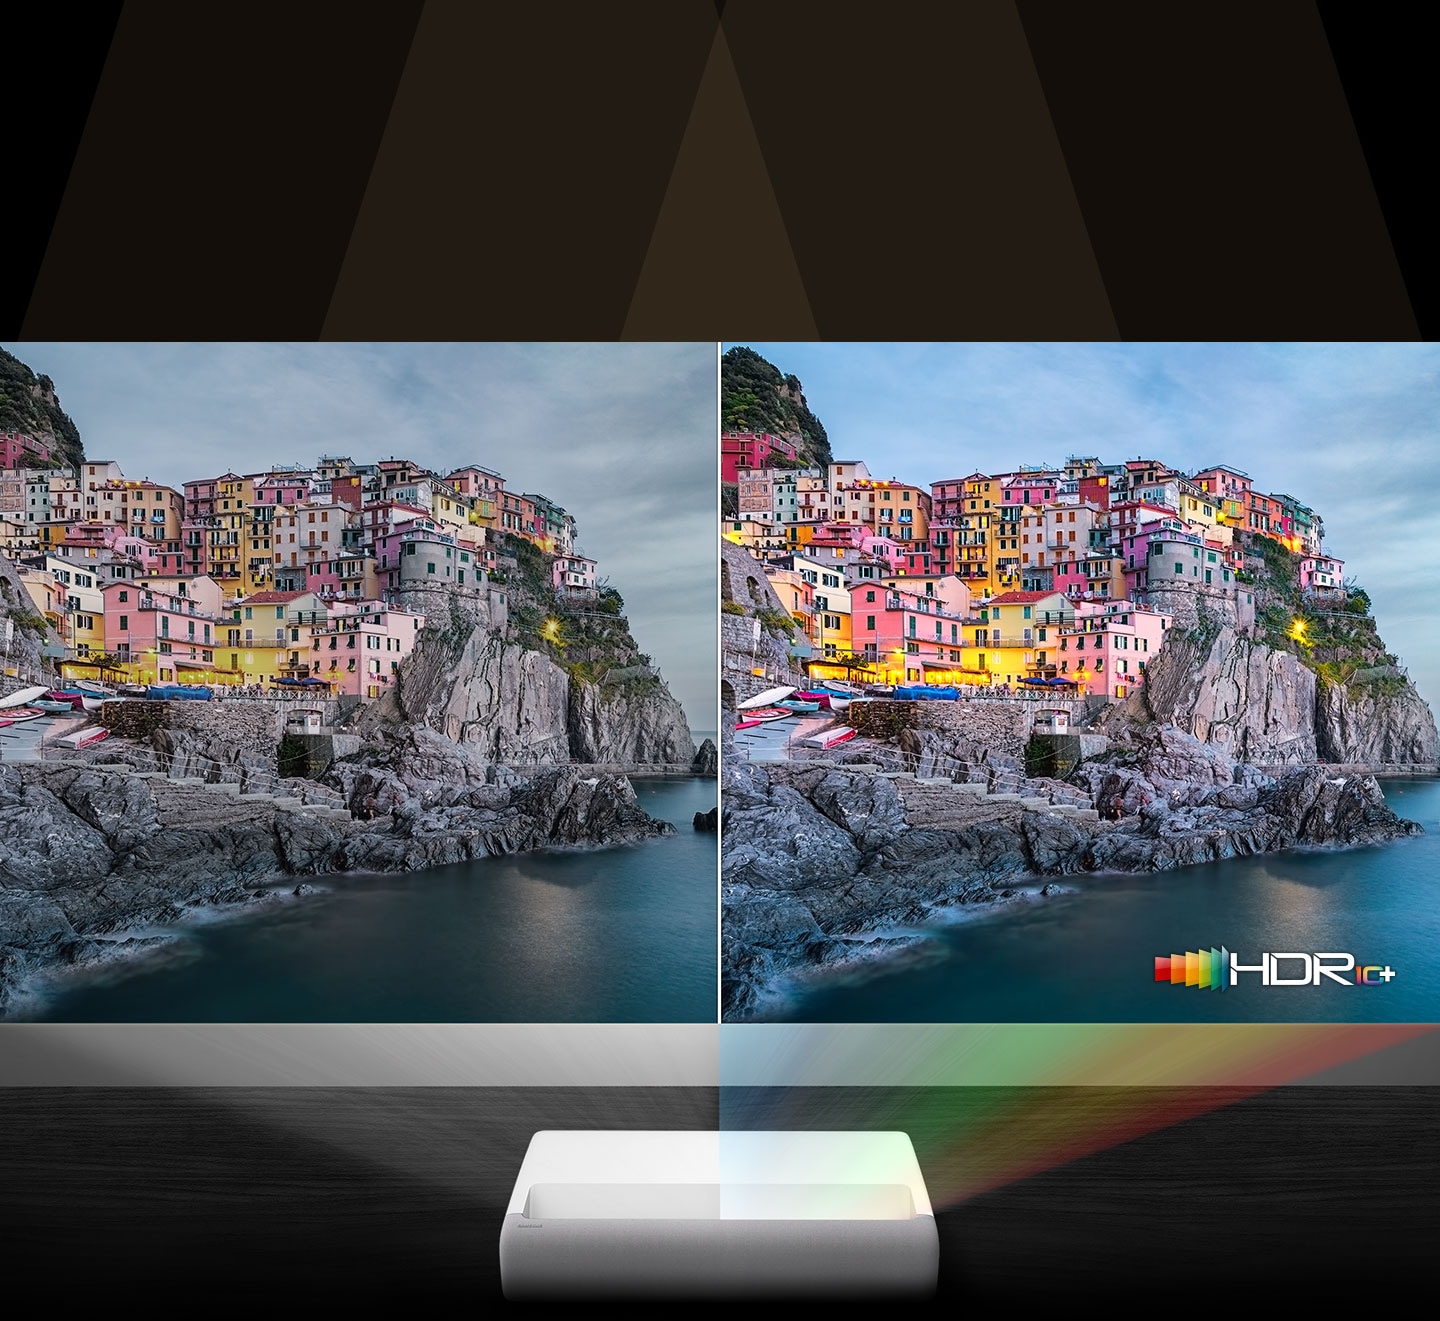 Using laser technology, The Premiere is showing two screens for comparing hdr 10 plus and to emphasize 4K image quality.